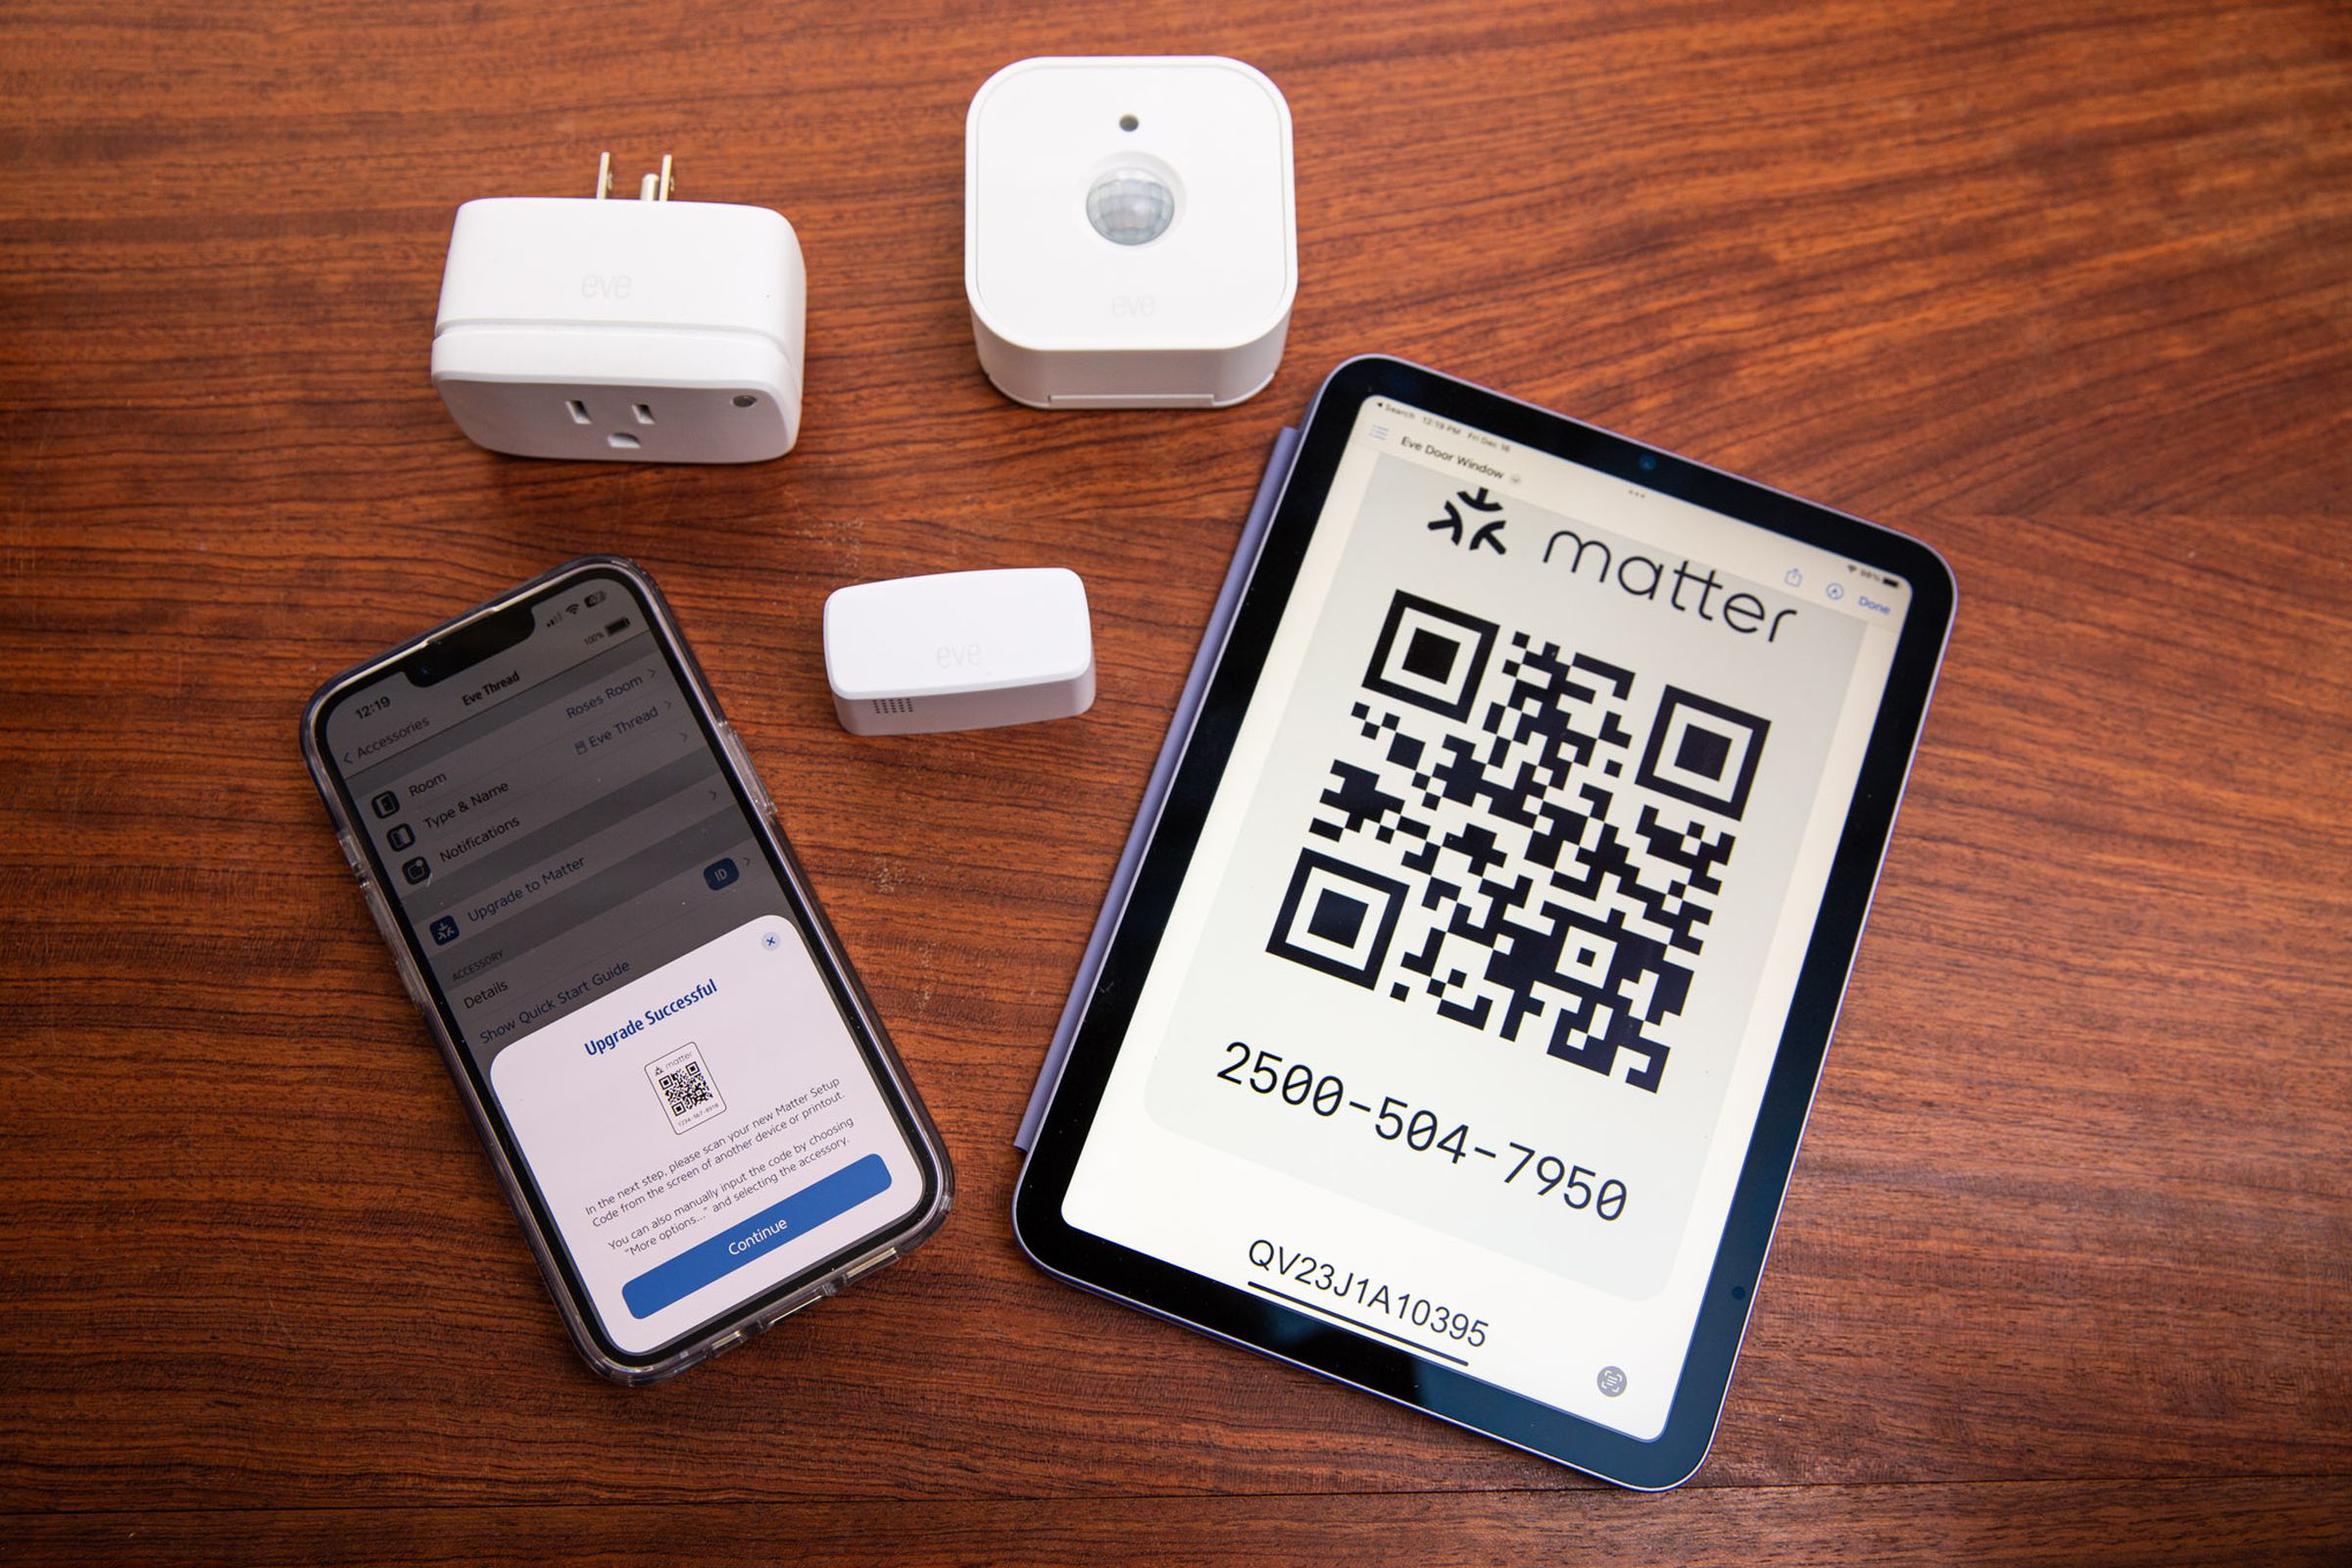 Adding Matter devices to your smart home is similar to using Apple’s HomeKit platform. 